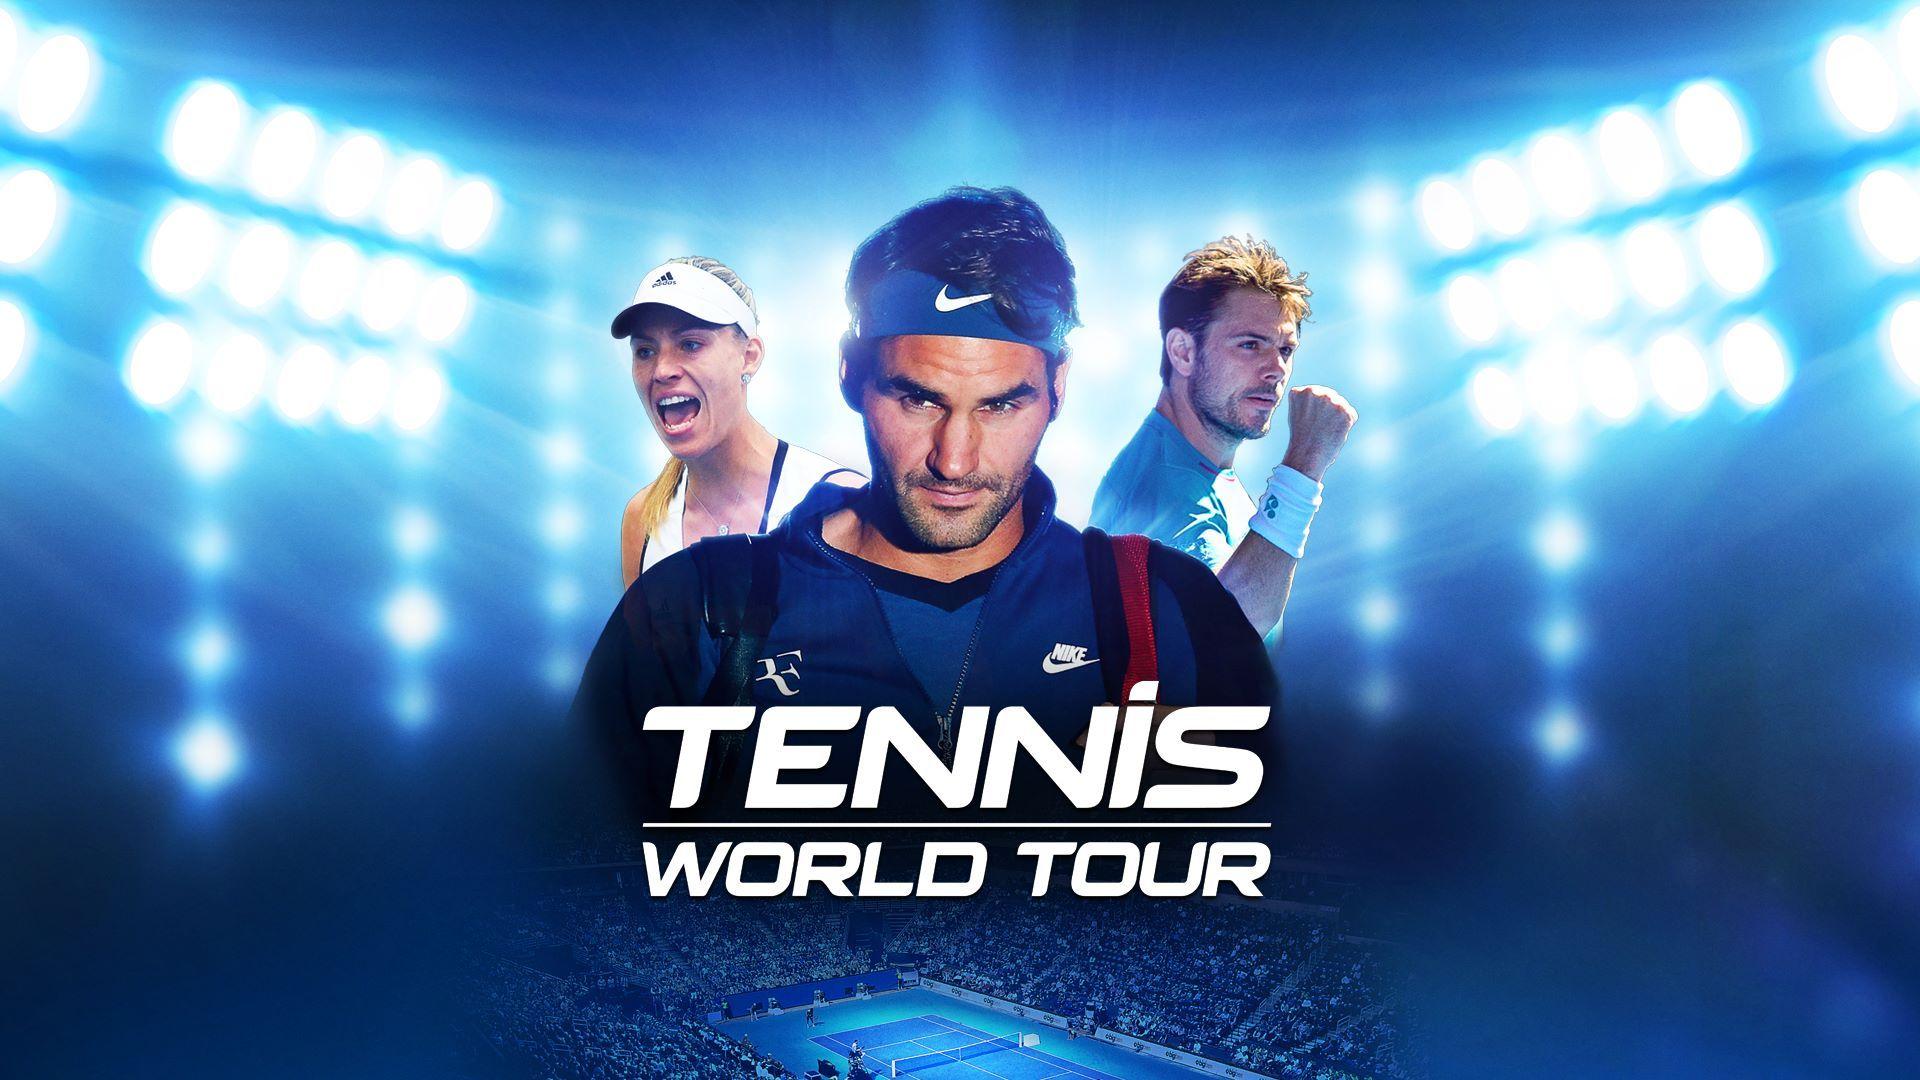 Save Tennis World Tour HD Wallpaper games review, play